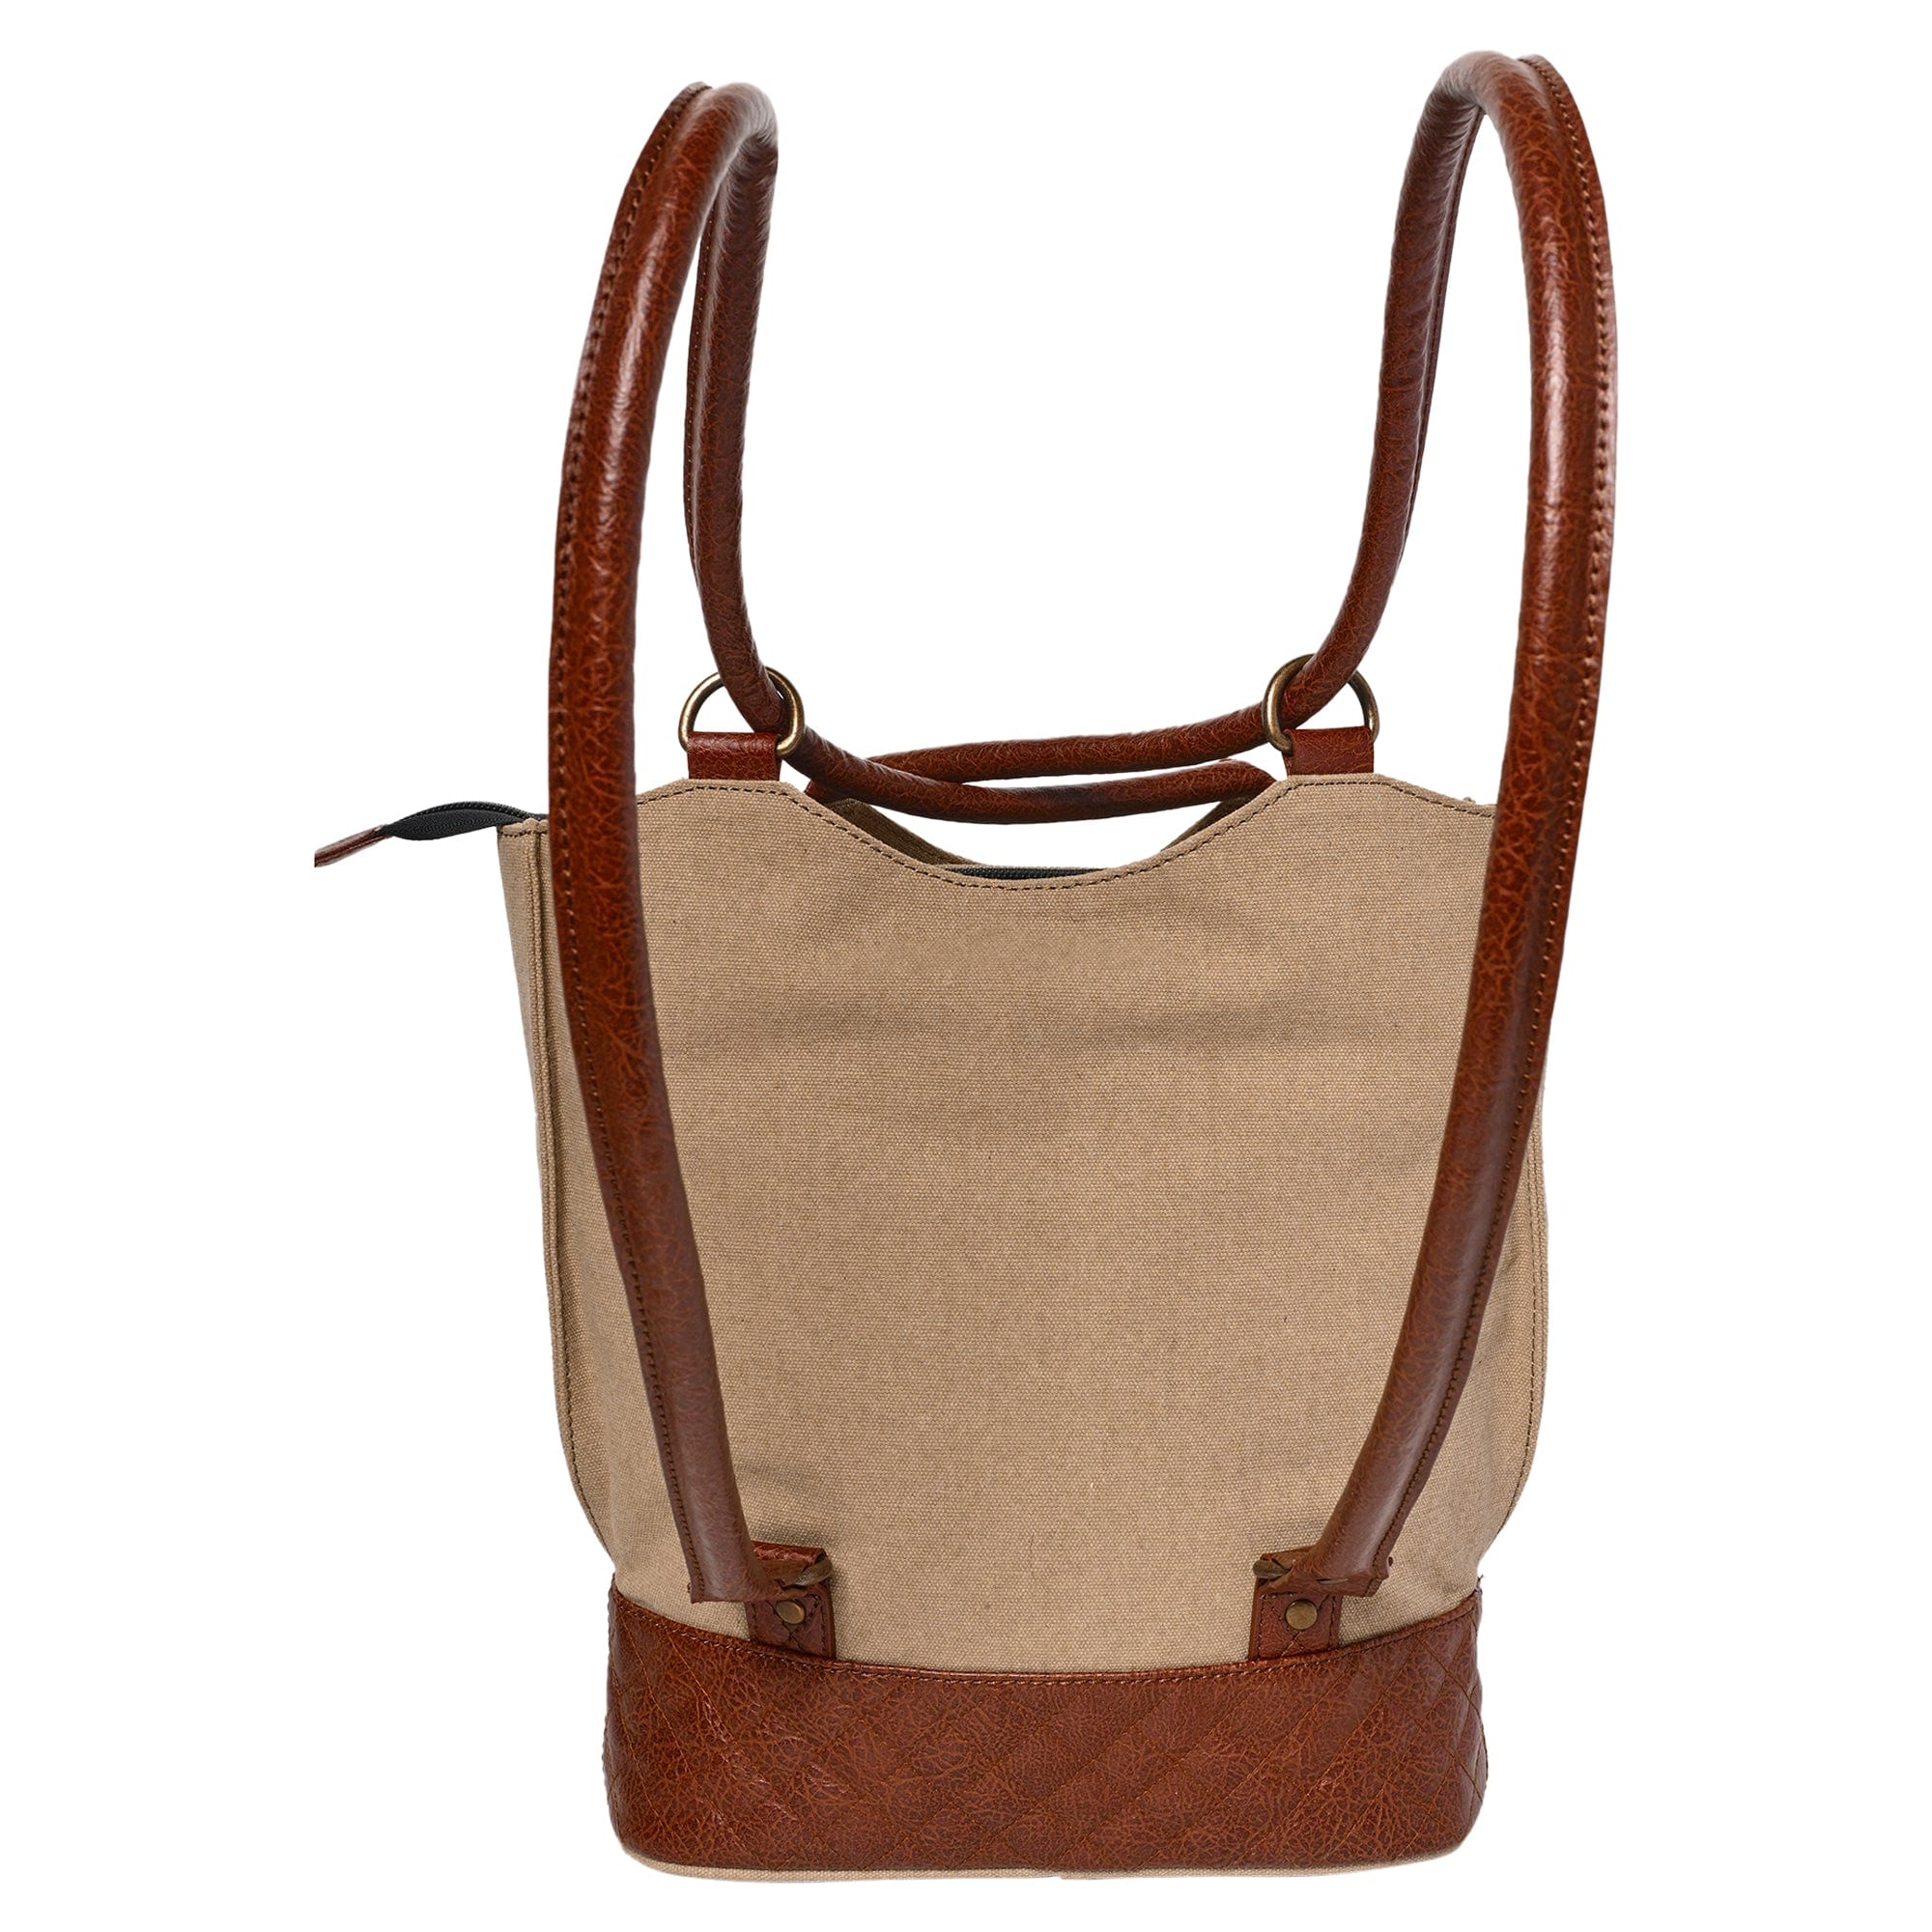 Mona-B Bags Mona B Two in One Convertible Tote: Beige - (M-2507)